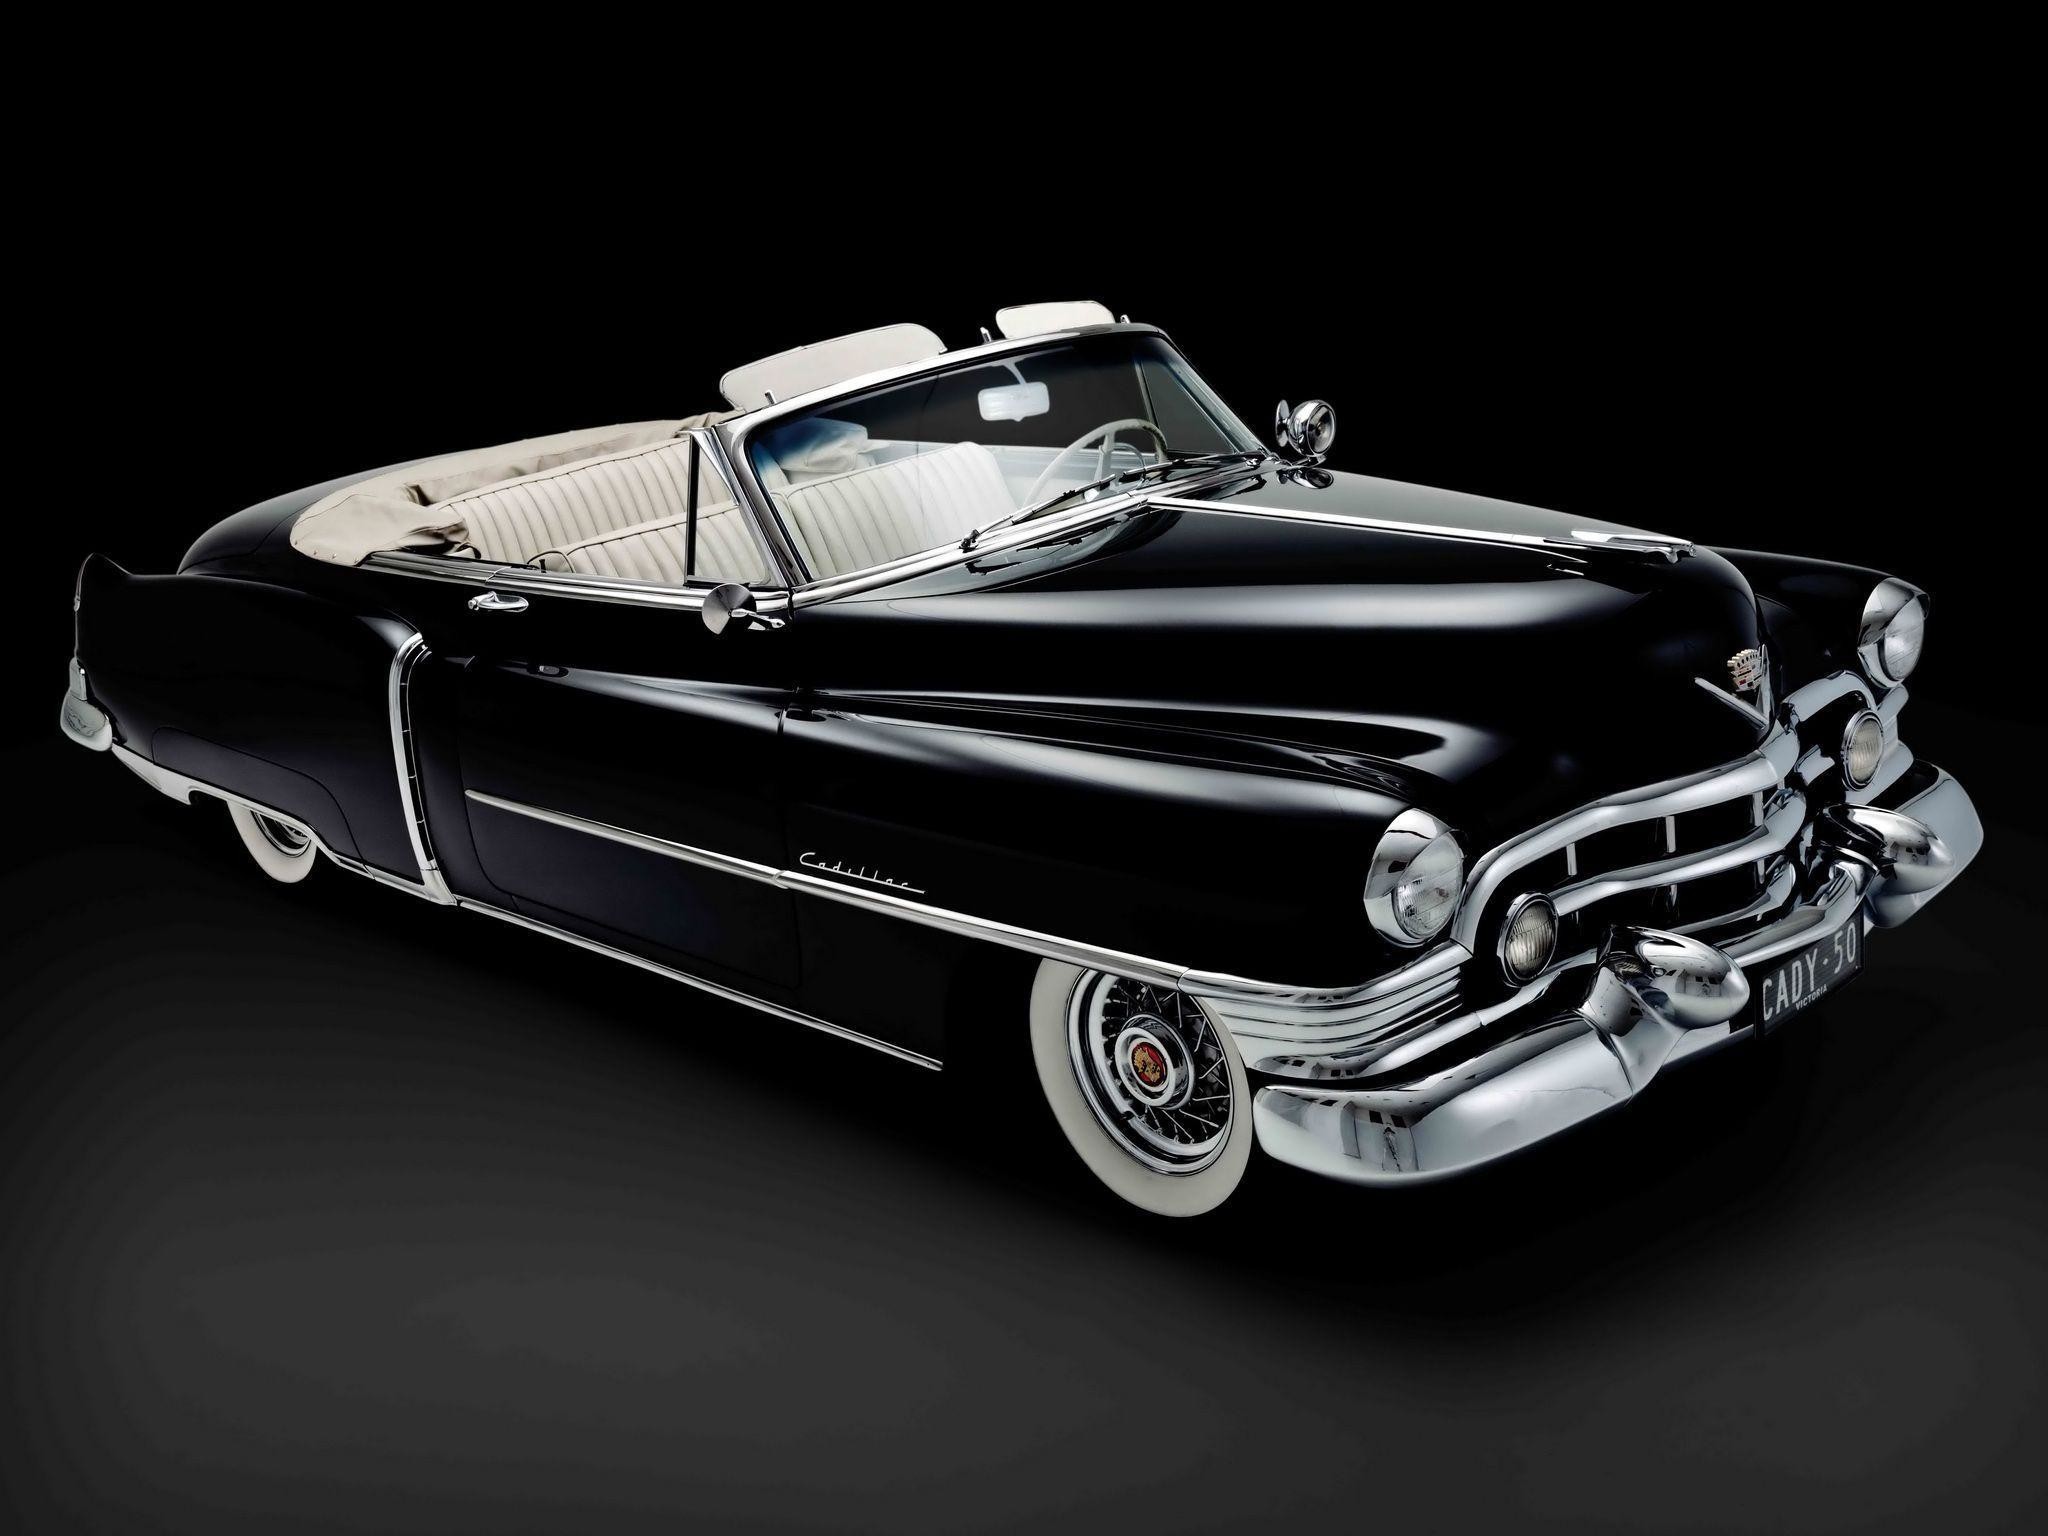 2048x1536 1950 Cadillac Sixty-Two Convertible 6267 luxury retro wallpaper .